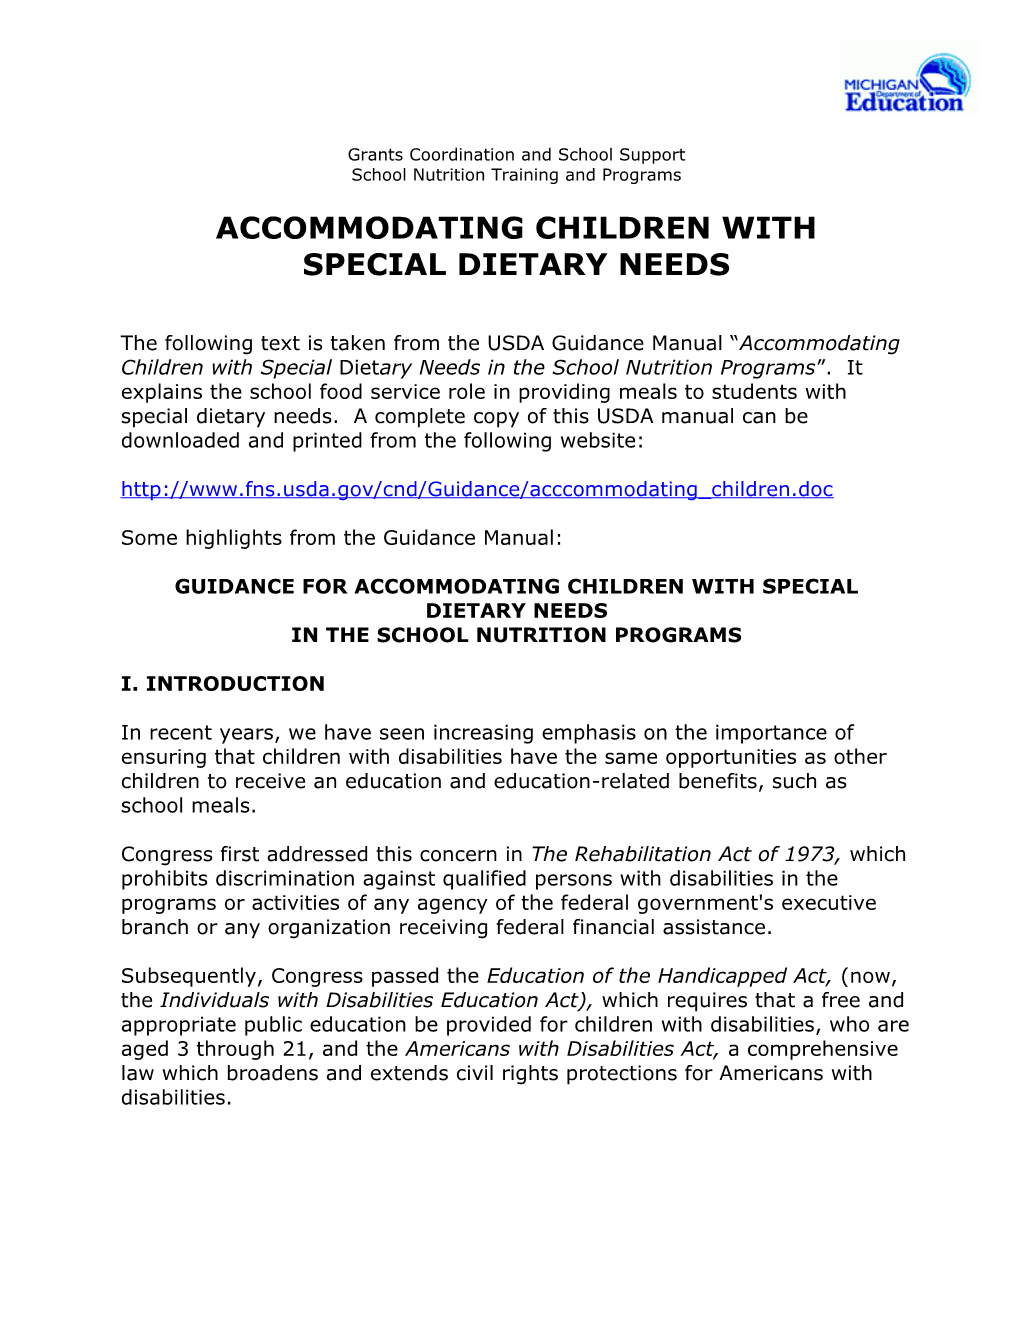 Accommodating Children with Special Dietary Needs in the School Nutrition Programs